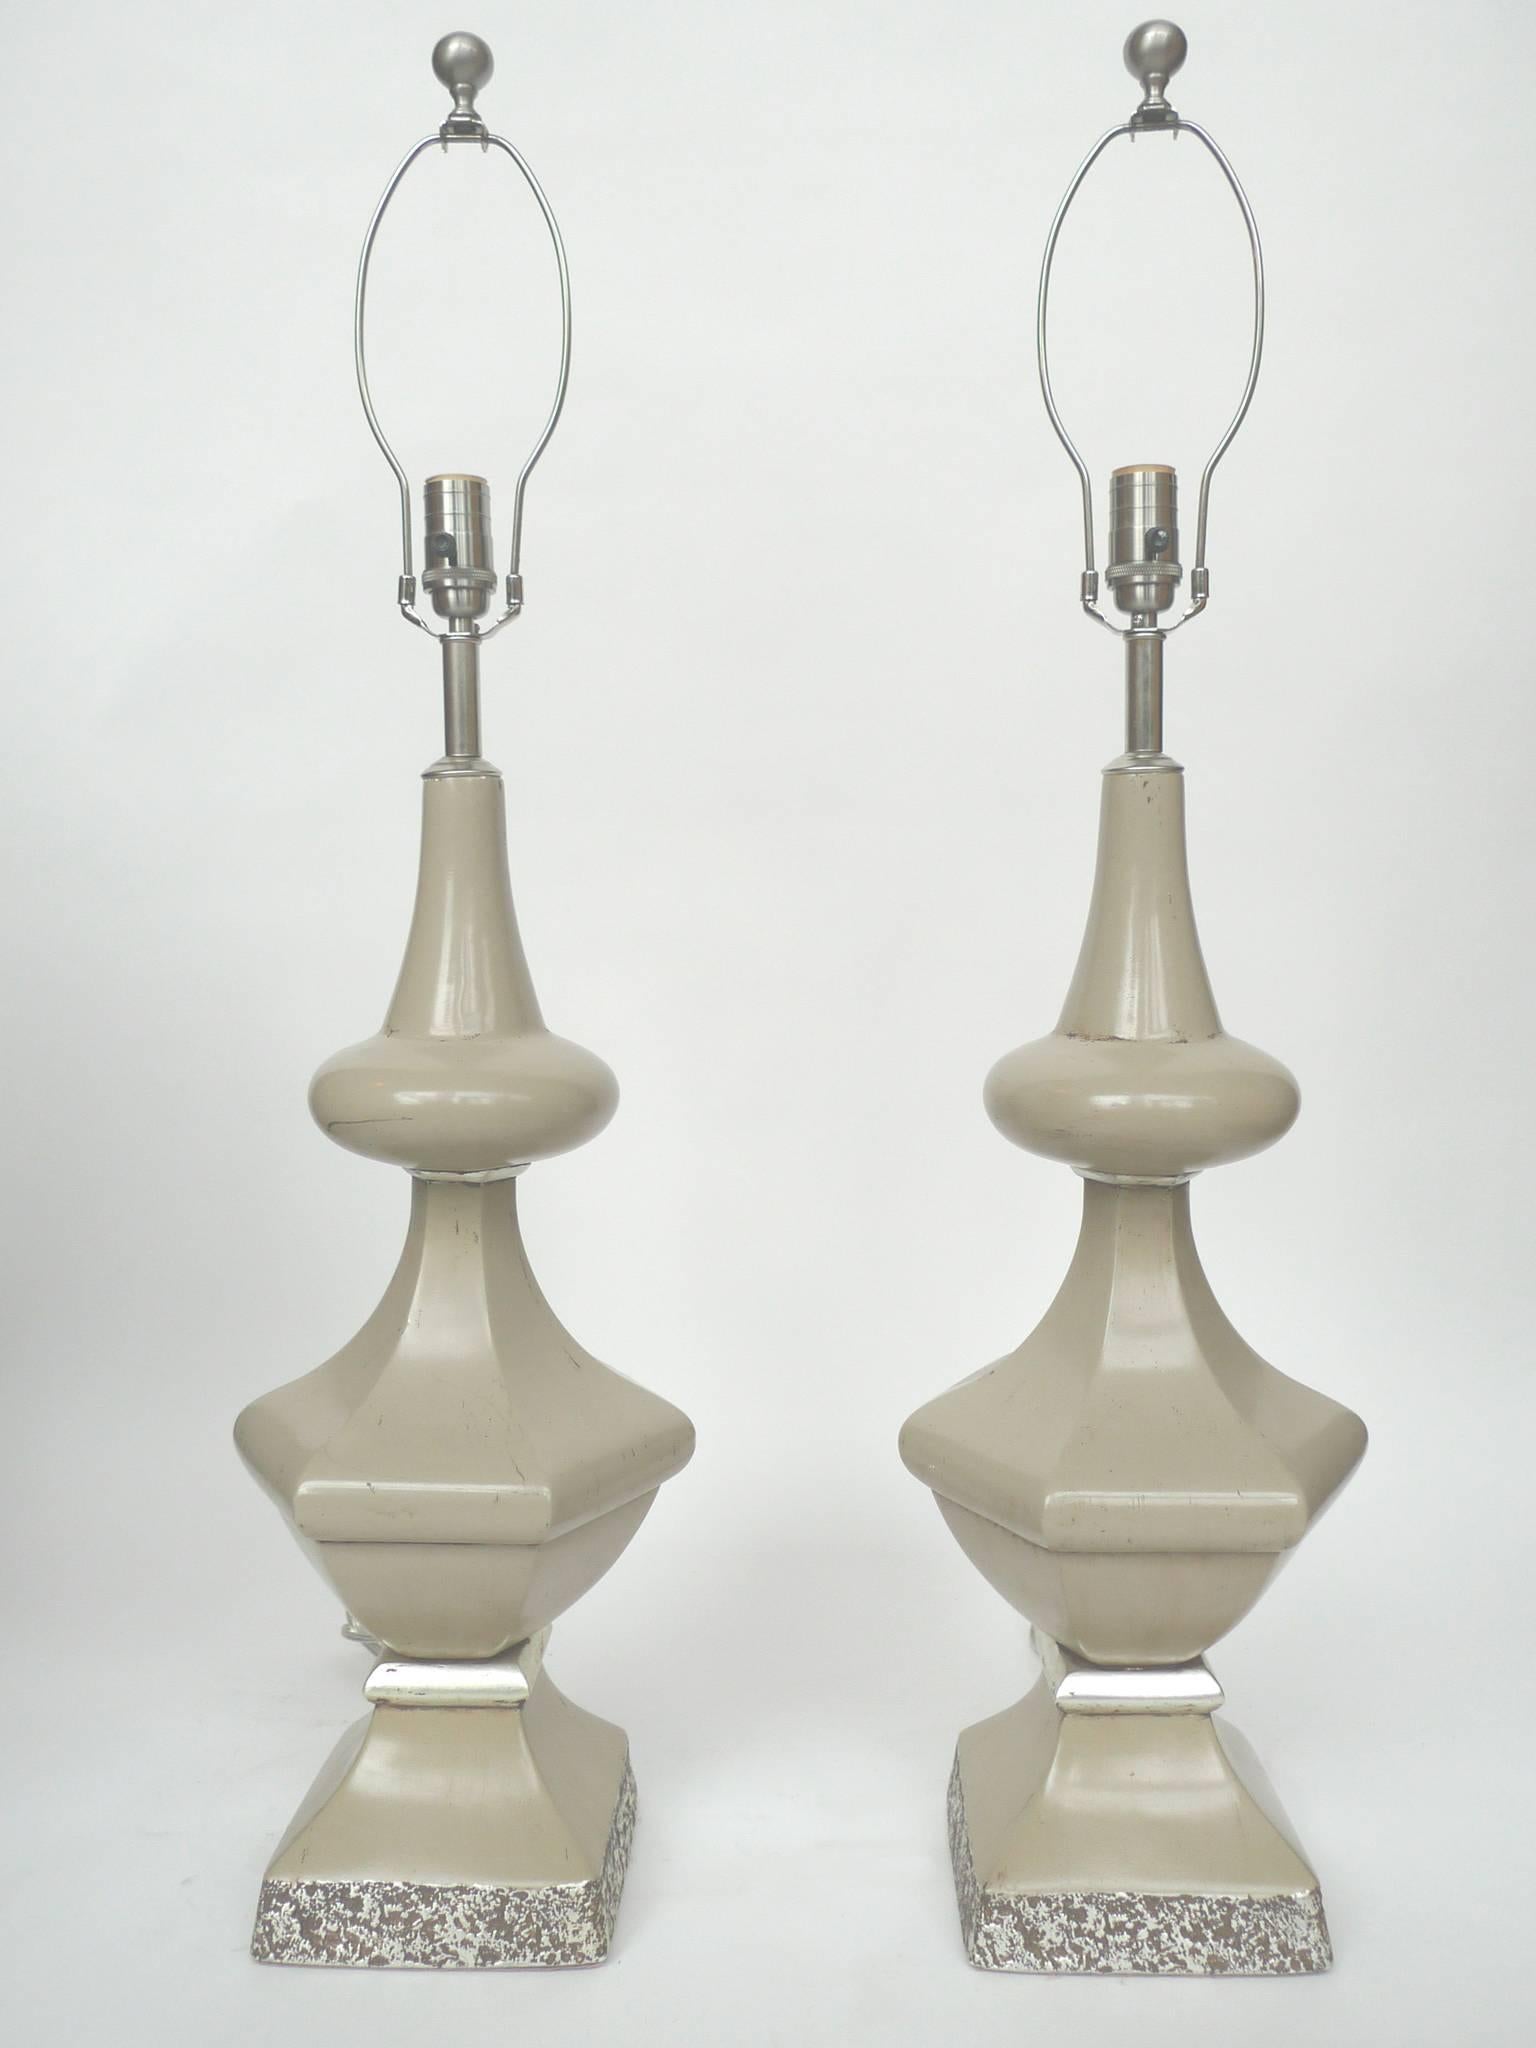 This pair of tall and baluster-shaped table lamps are by the American interior decorator Dorothy Draper. The lamps are comprised of enameled iron with silver-hued details. Included are the original matching shades. The lamps have been rewired with